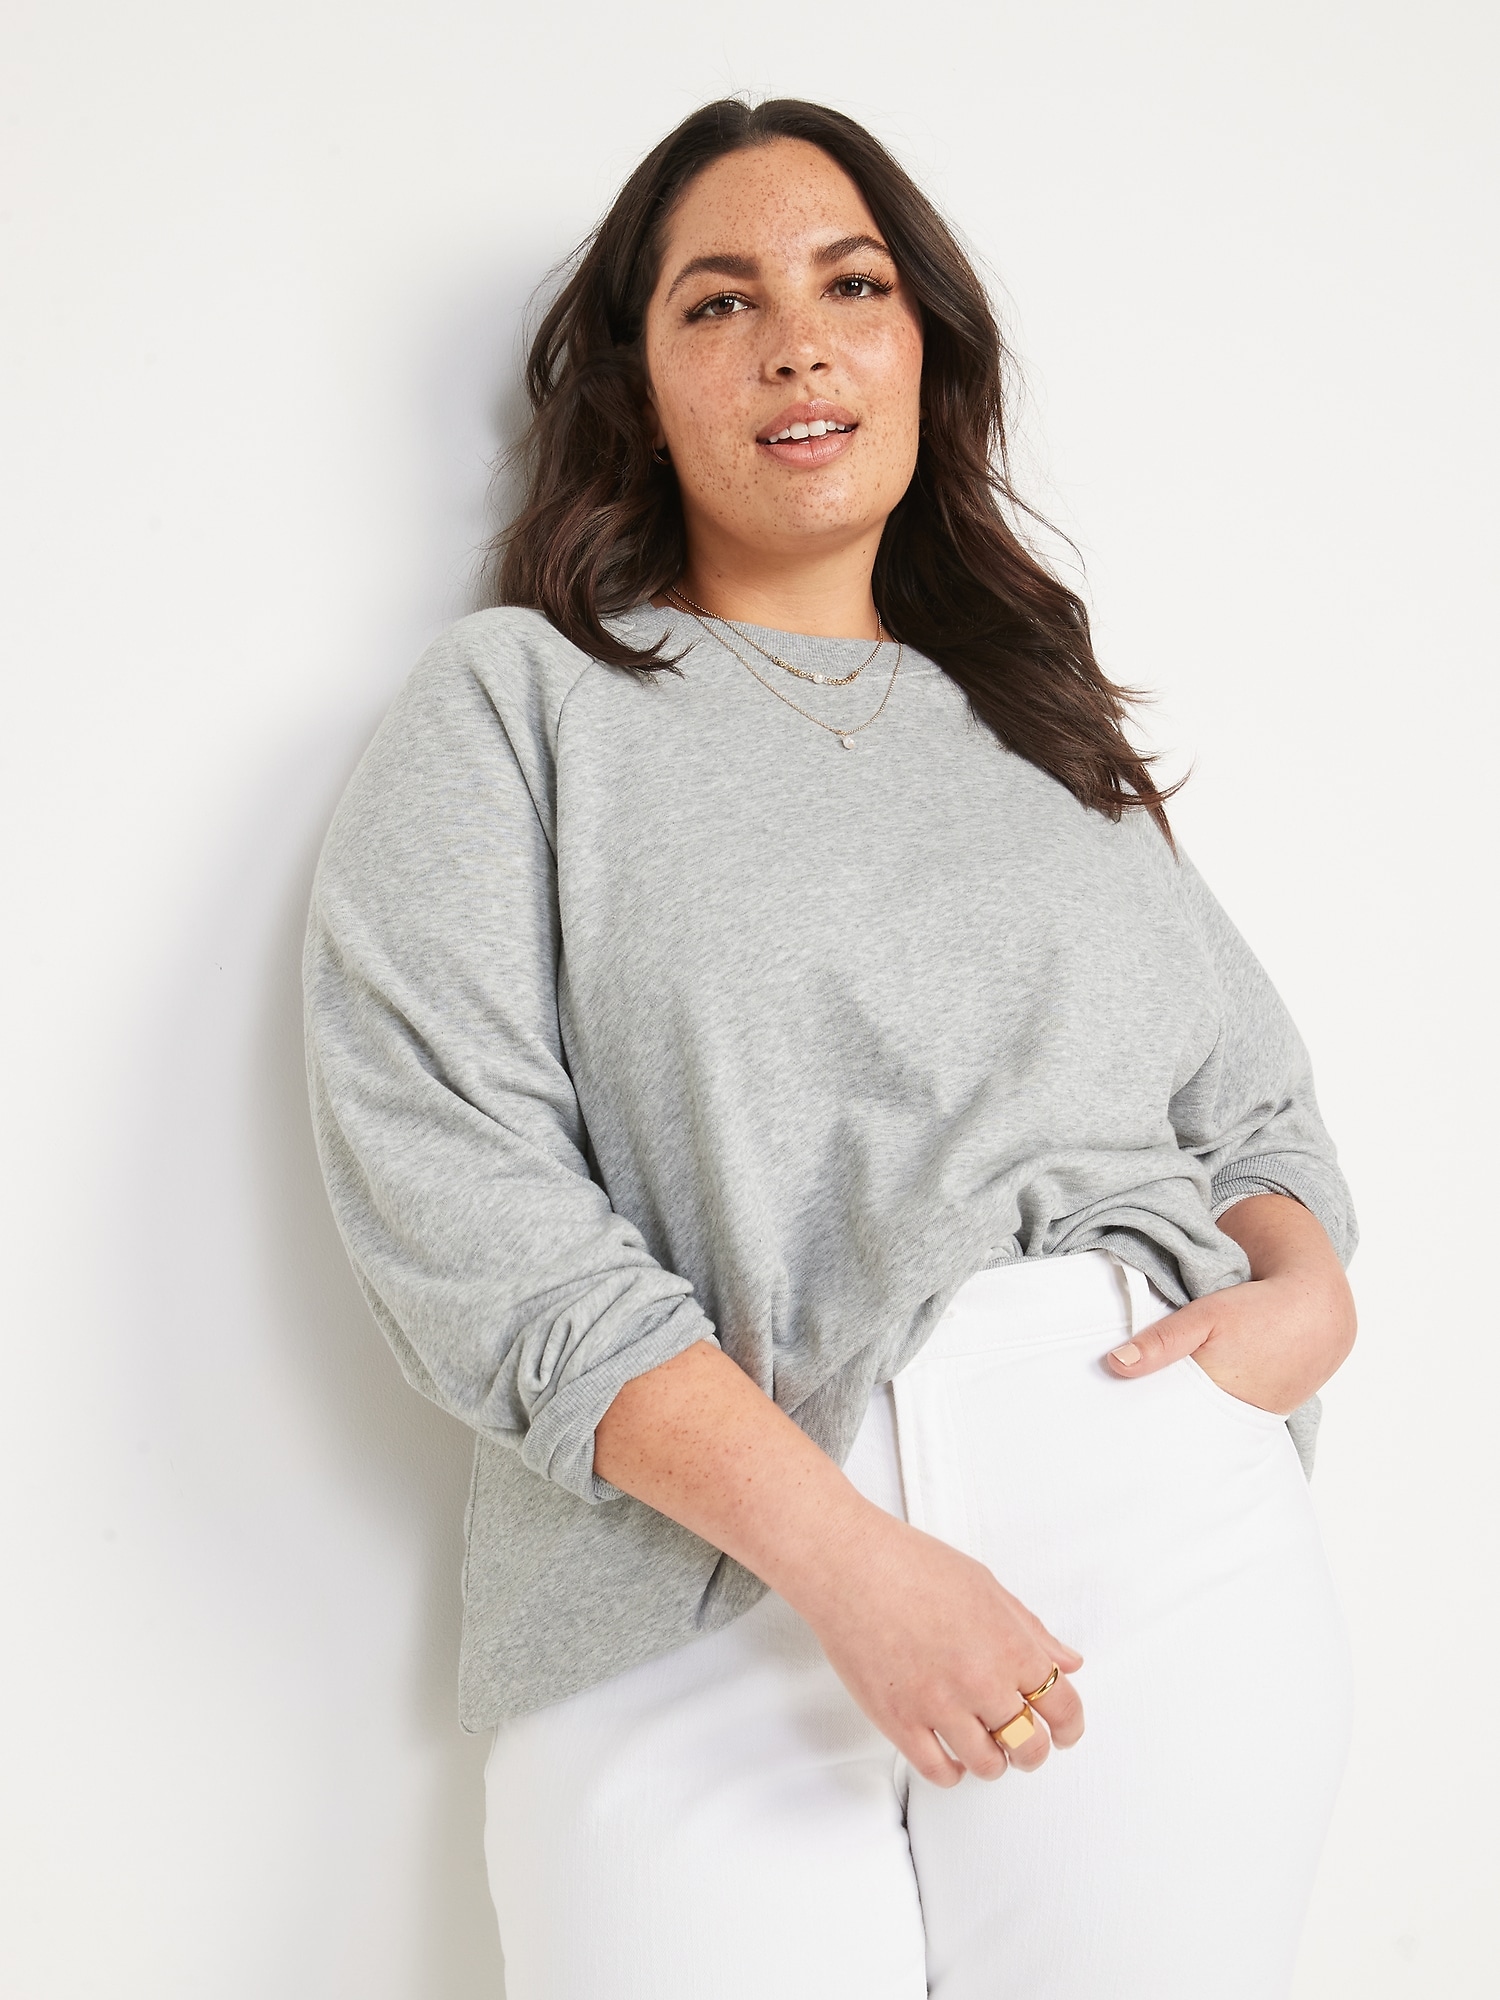 Old Oversized Tunic | for French Women Navy Terry Sweatshirt